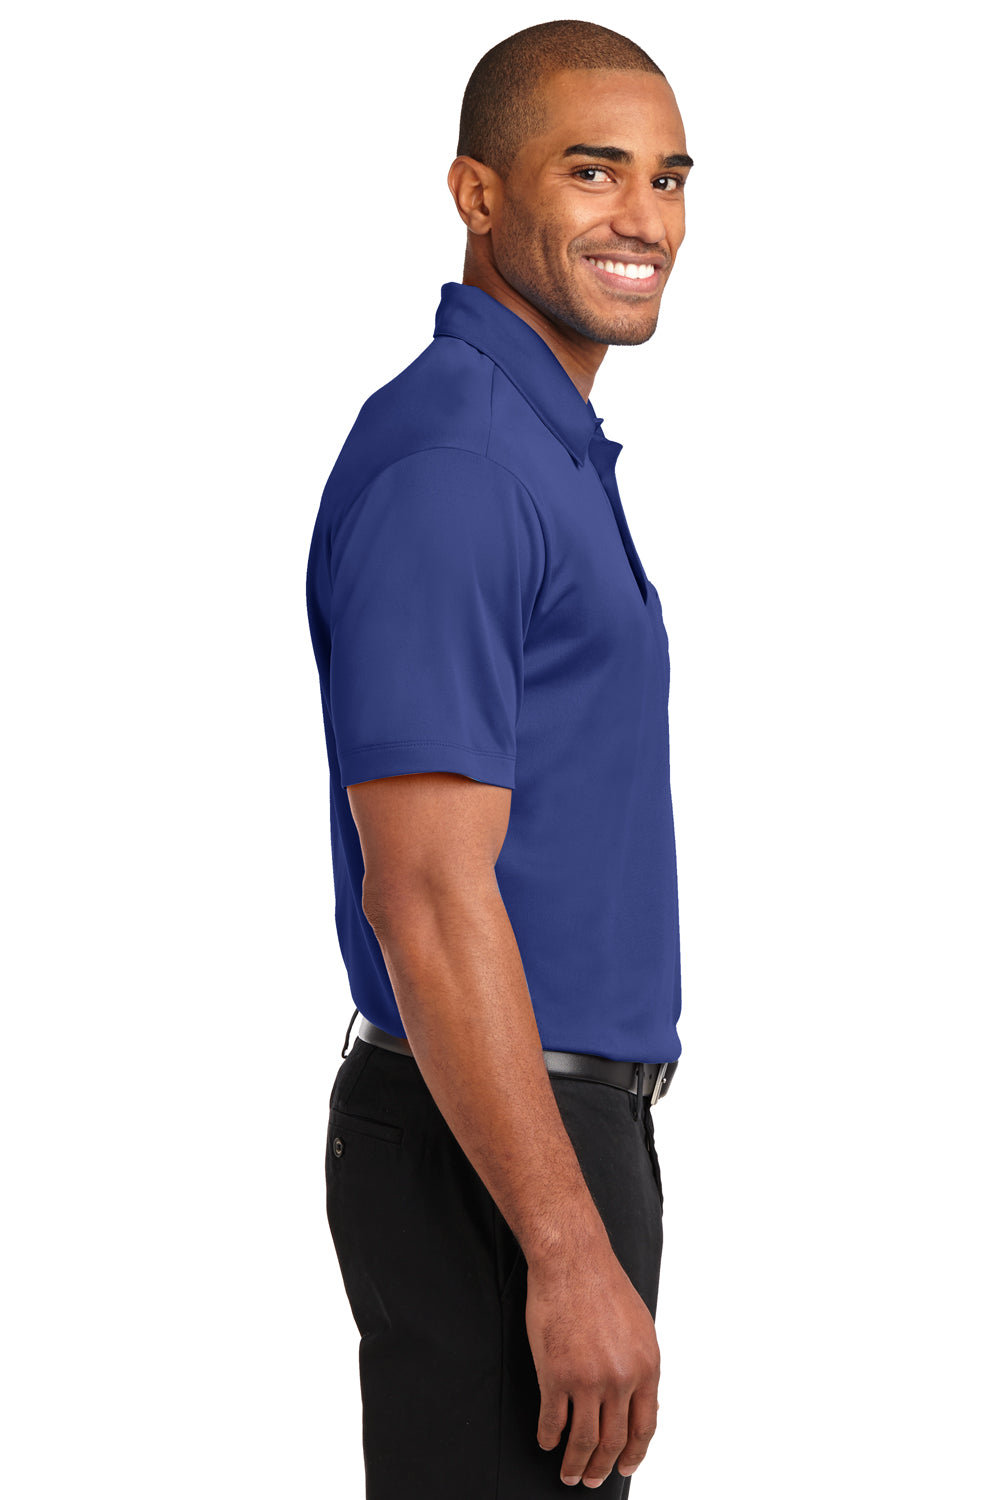 Port Authority K540P Mens Silk Touch Performance Moisture Wicking Short Sleeve Polo Shirt w/ Pocket Royal Blue Side